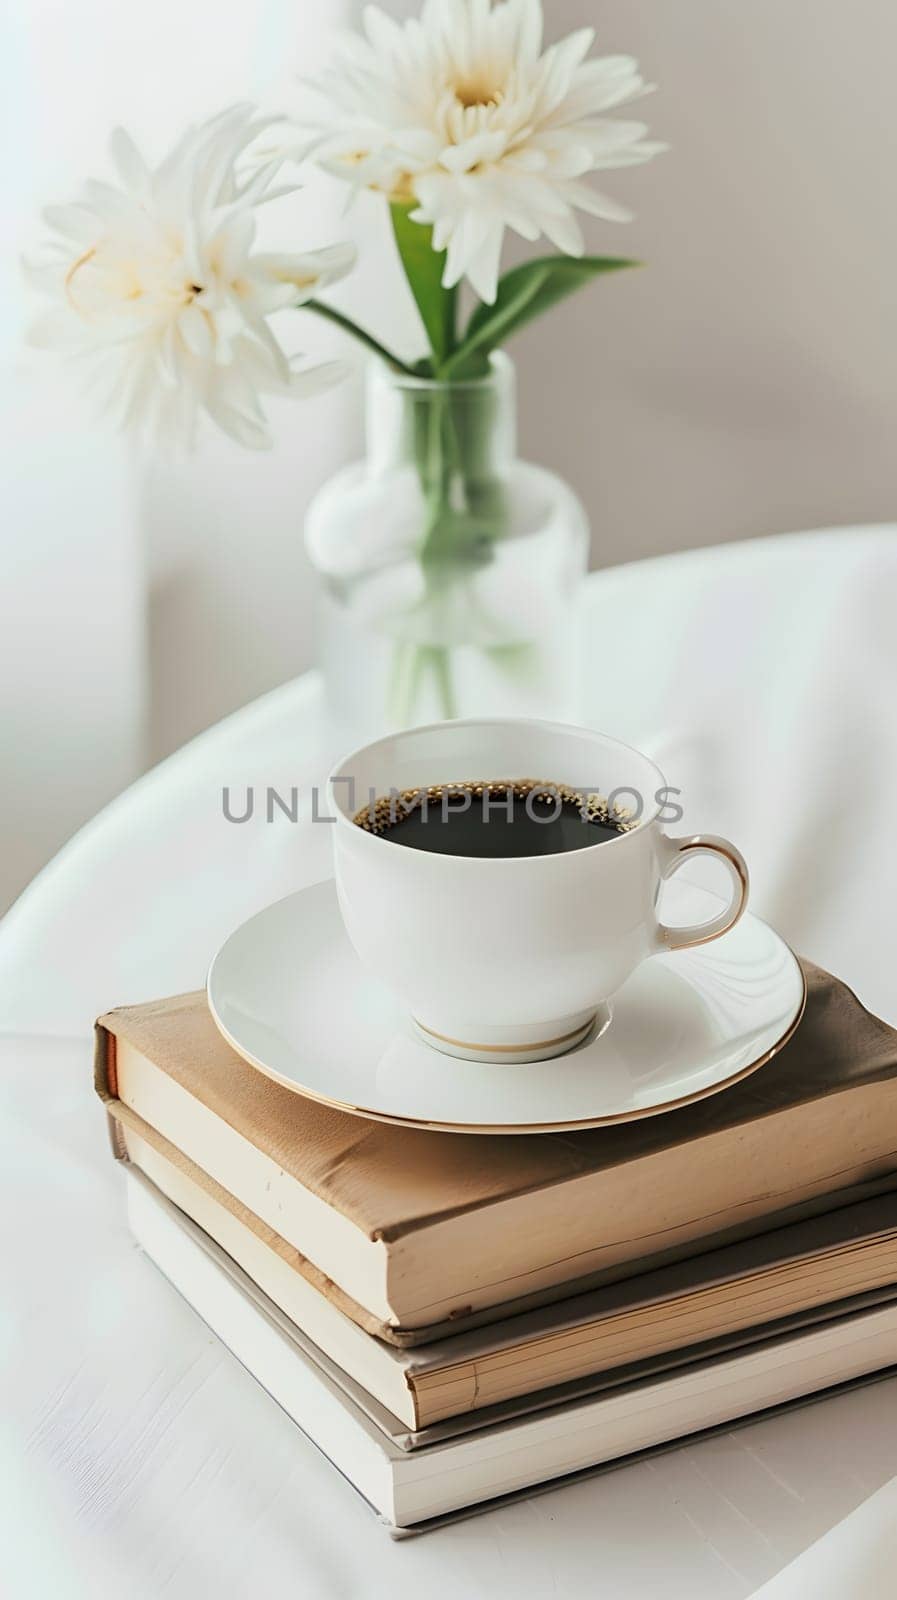 A teacup sits atop a pile of books, next to a flower on the table by Nadtochiy